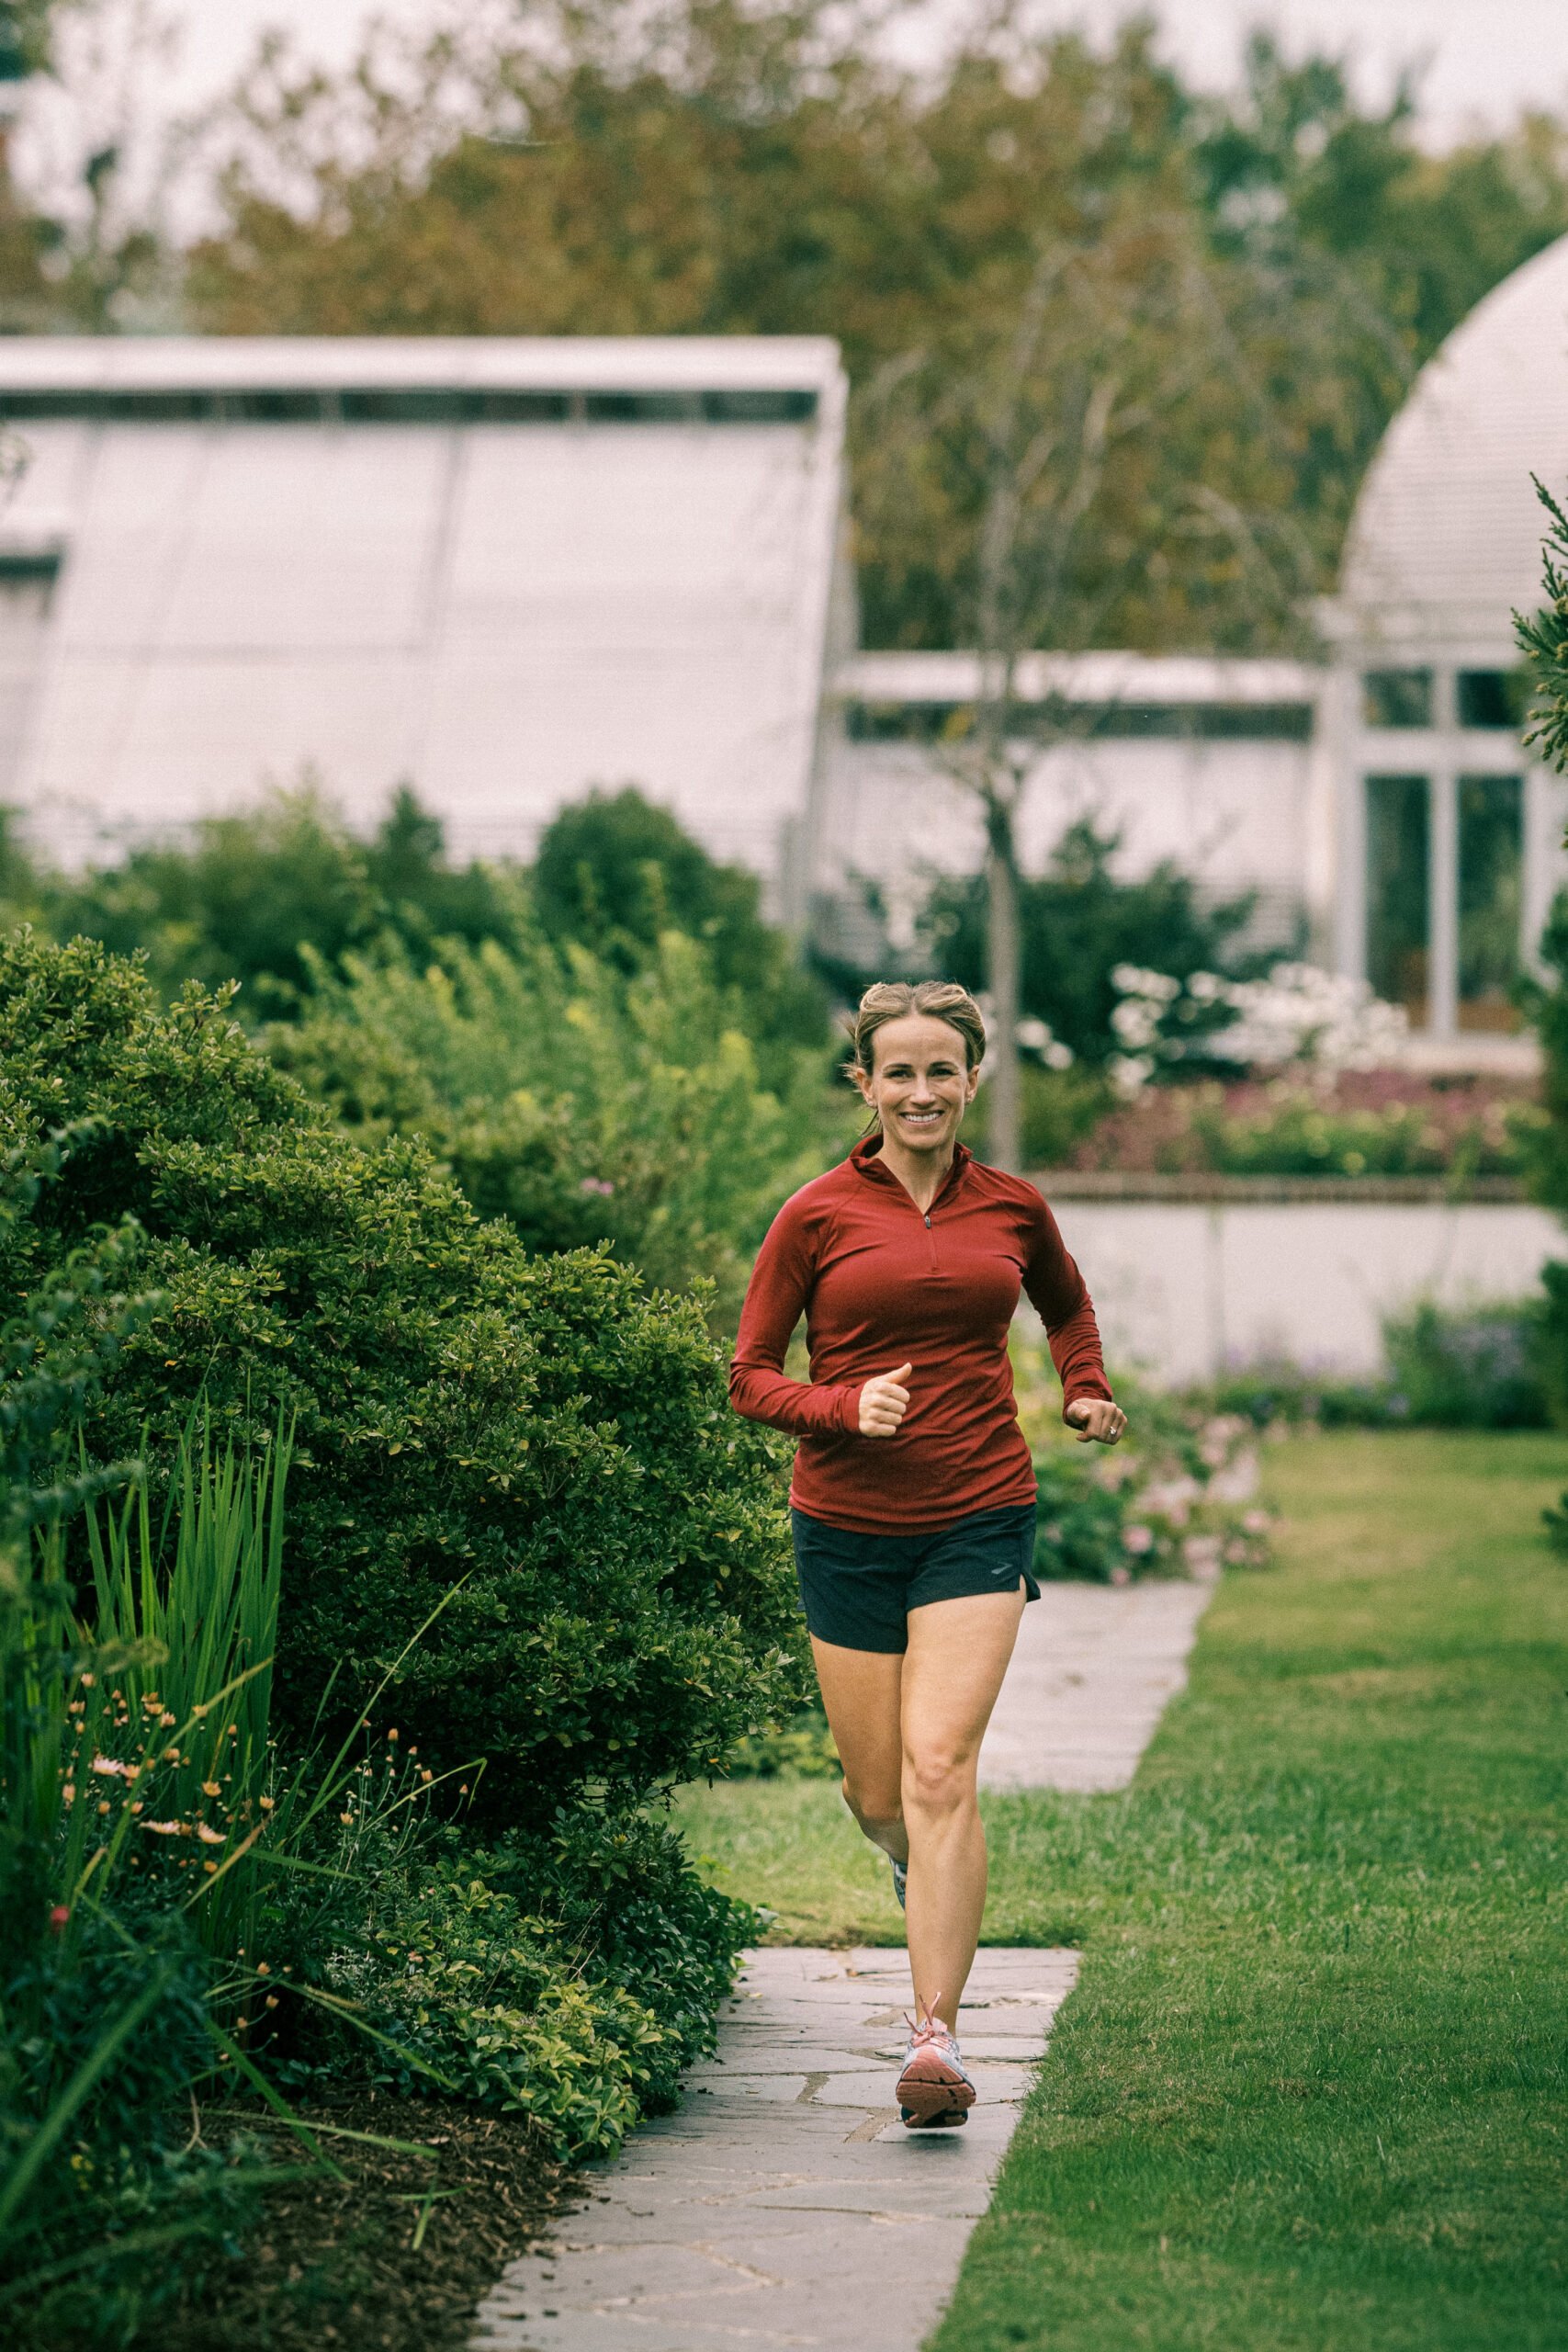 How to Become a Better Runner